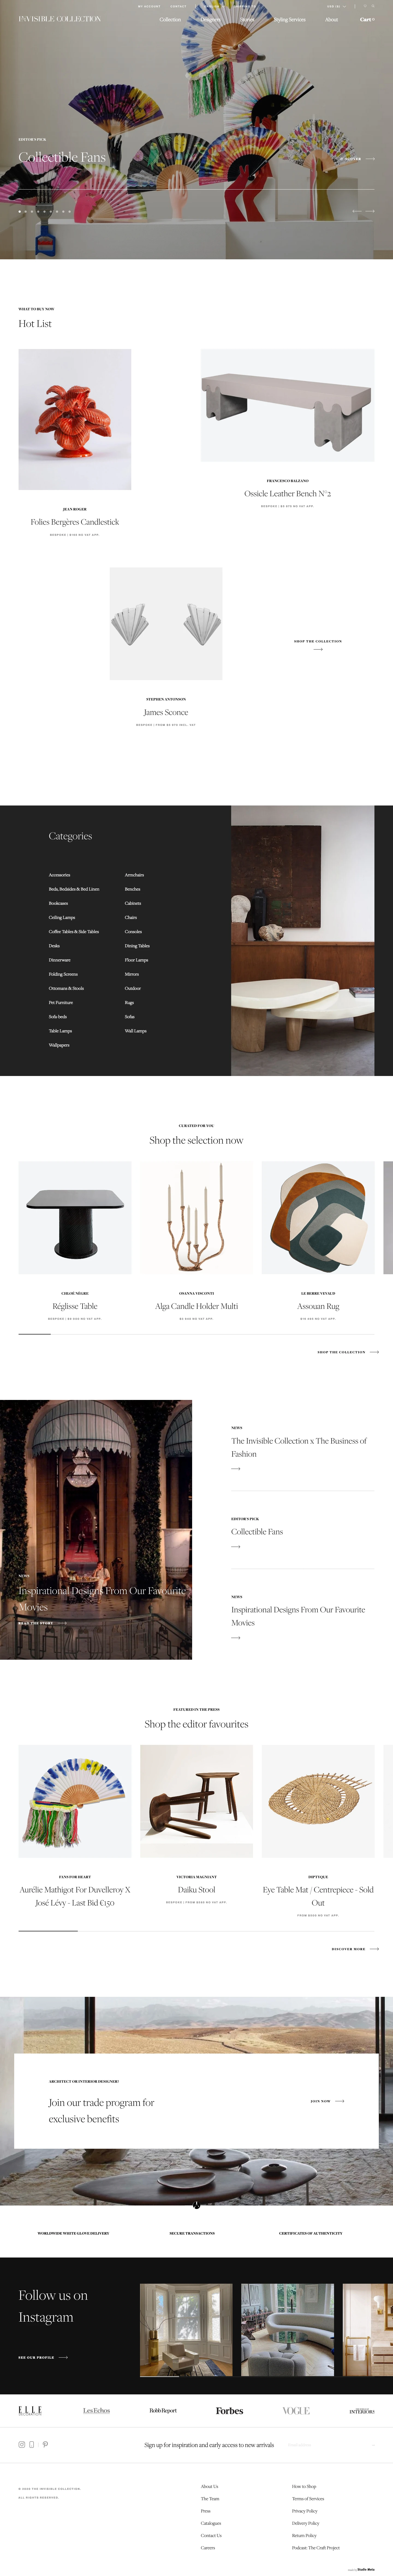 The Invisible Collection Landing Page Example: The Invisible Collection is the first online platform to sell a curated selection of outstanding pieces by the world’s best interior designers. All handmade by the most talented craftsmen.